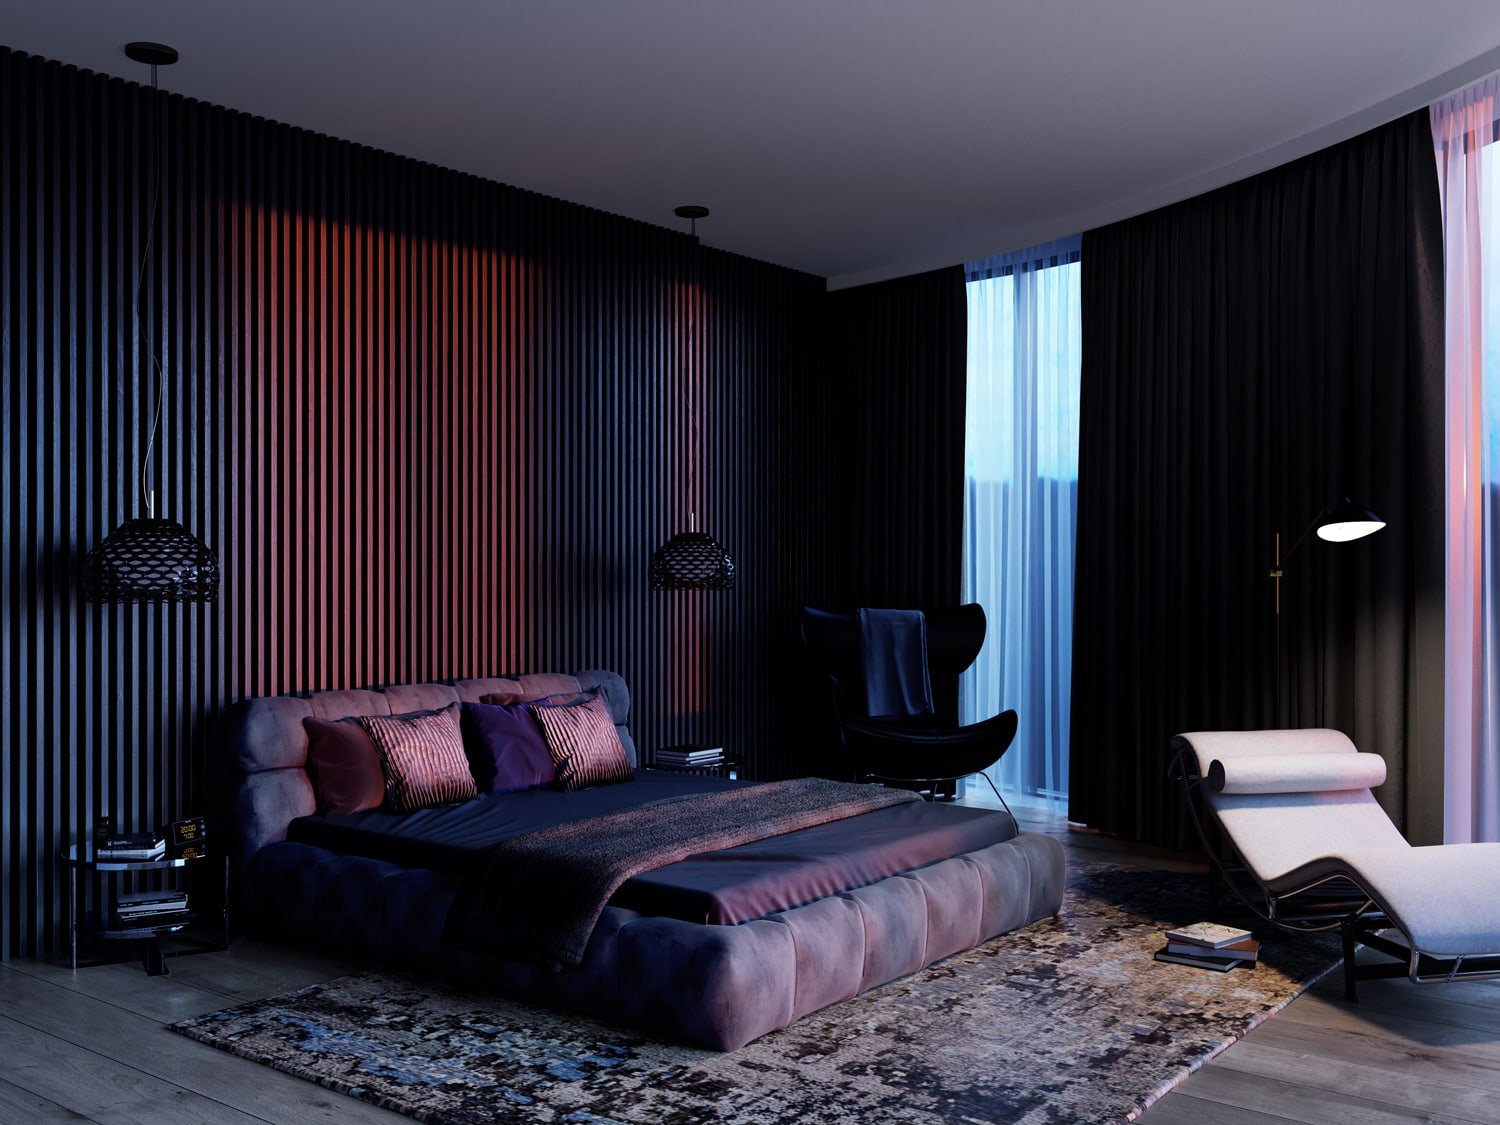 Beautiful red sunlight falls onto a luxurious bed through the open curtains in the bedroom, with the textured pillows and expensive panelled wall. Part of the dynamic creative pack.